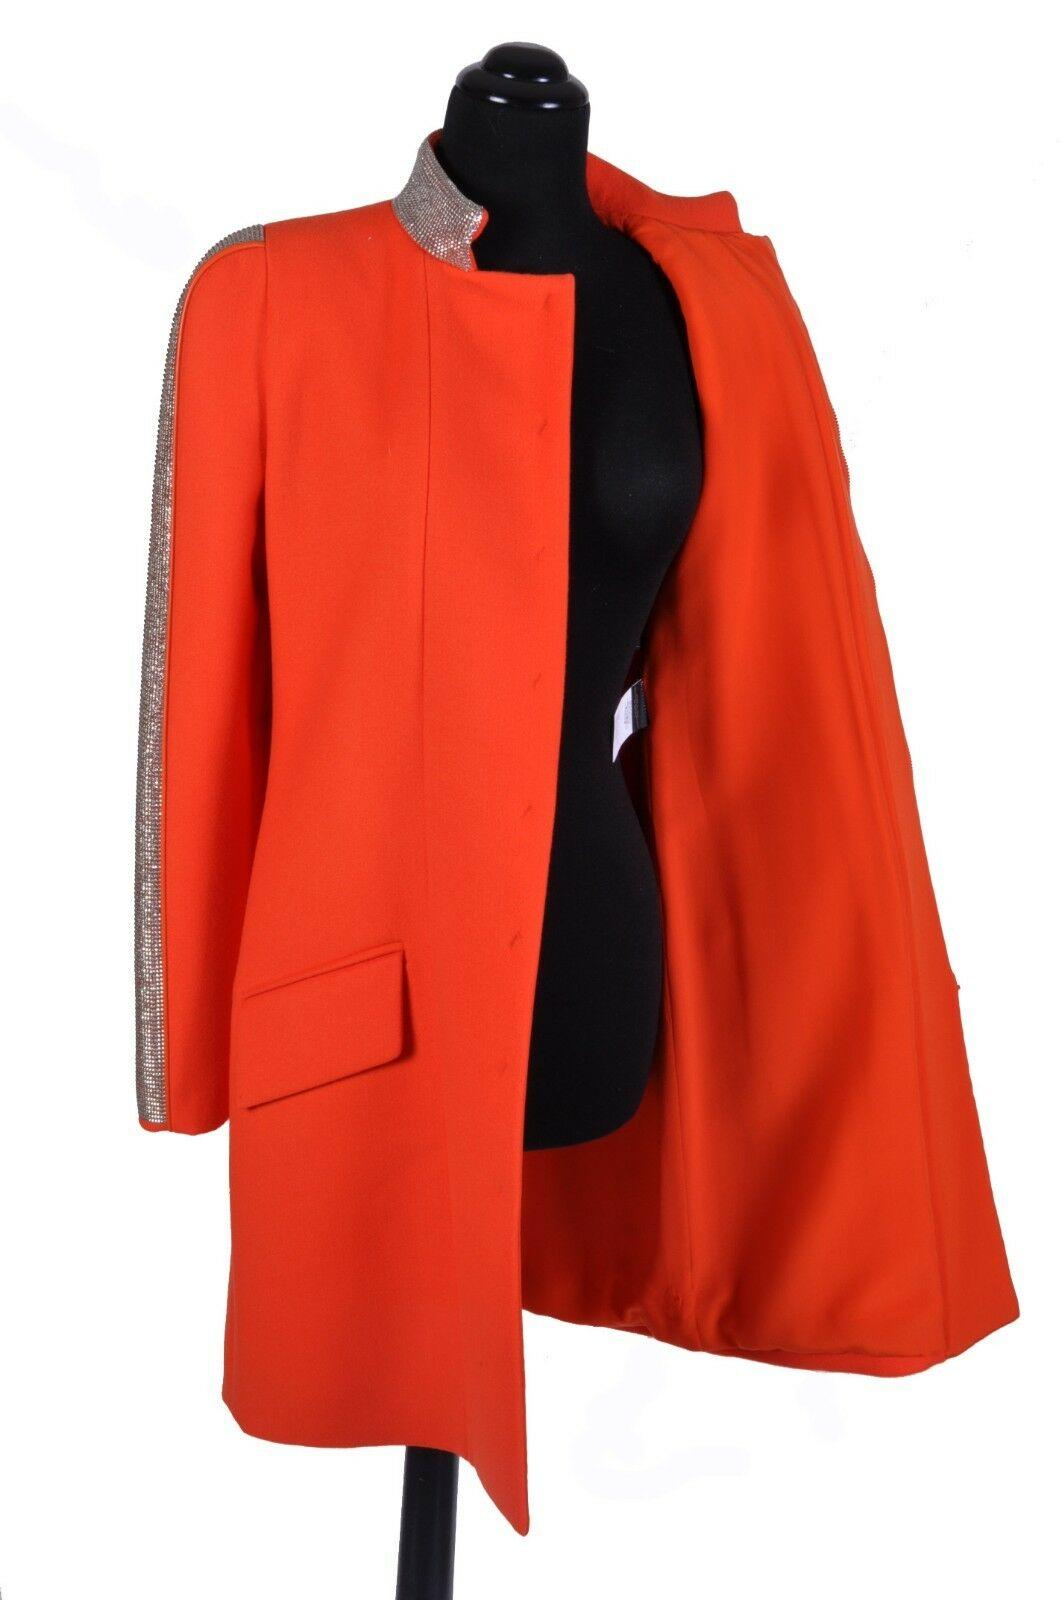 NEW VERSACE ORANGE WOOL and CHAIN MESH COAT 40 - 4 For Sale 5